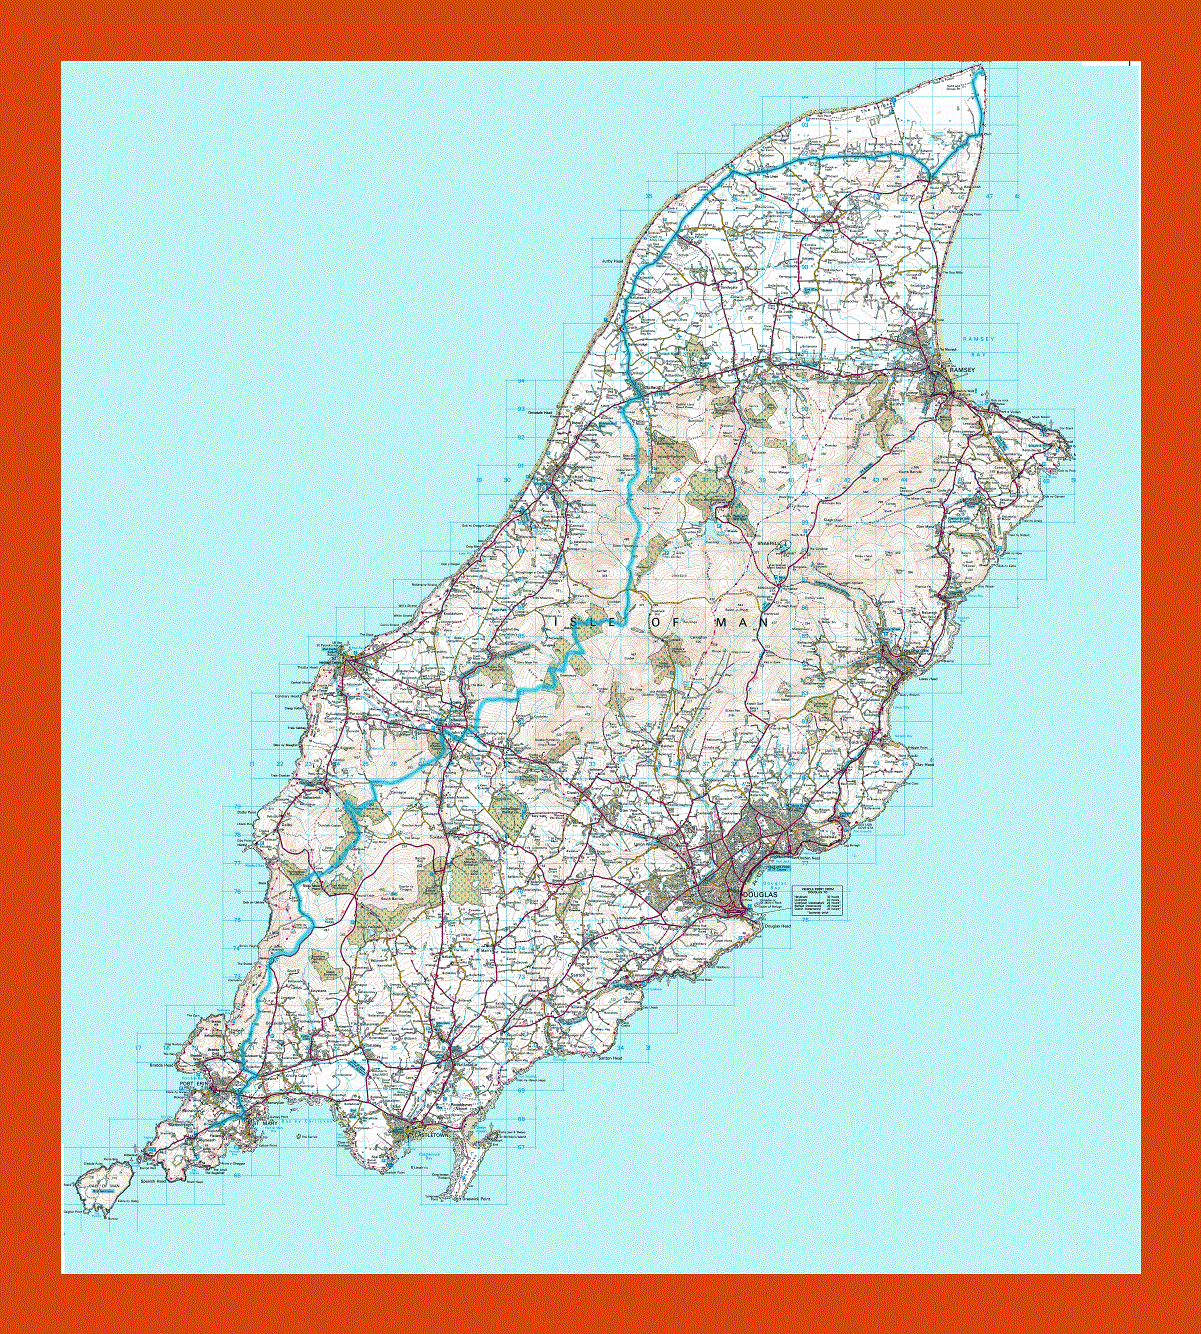 Topographical map of Isle of Man